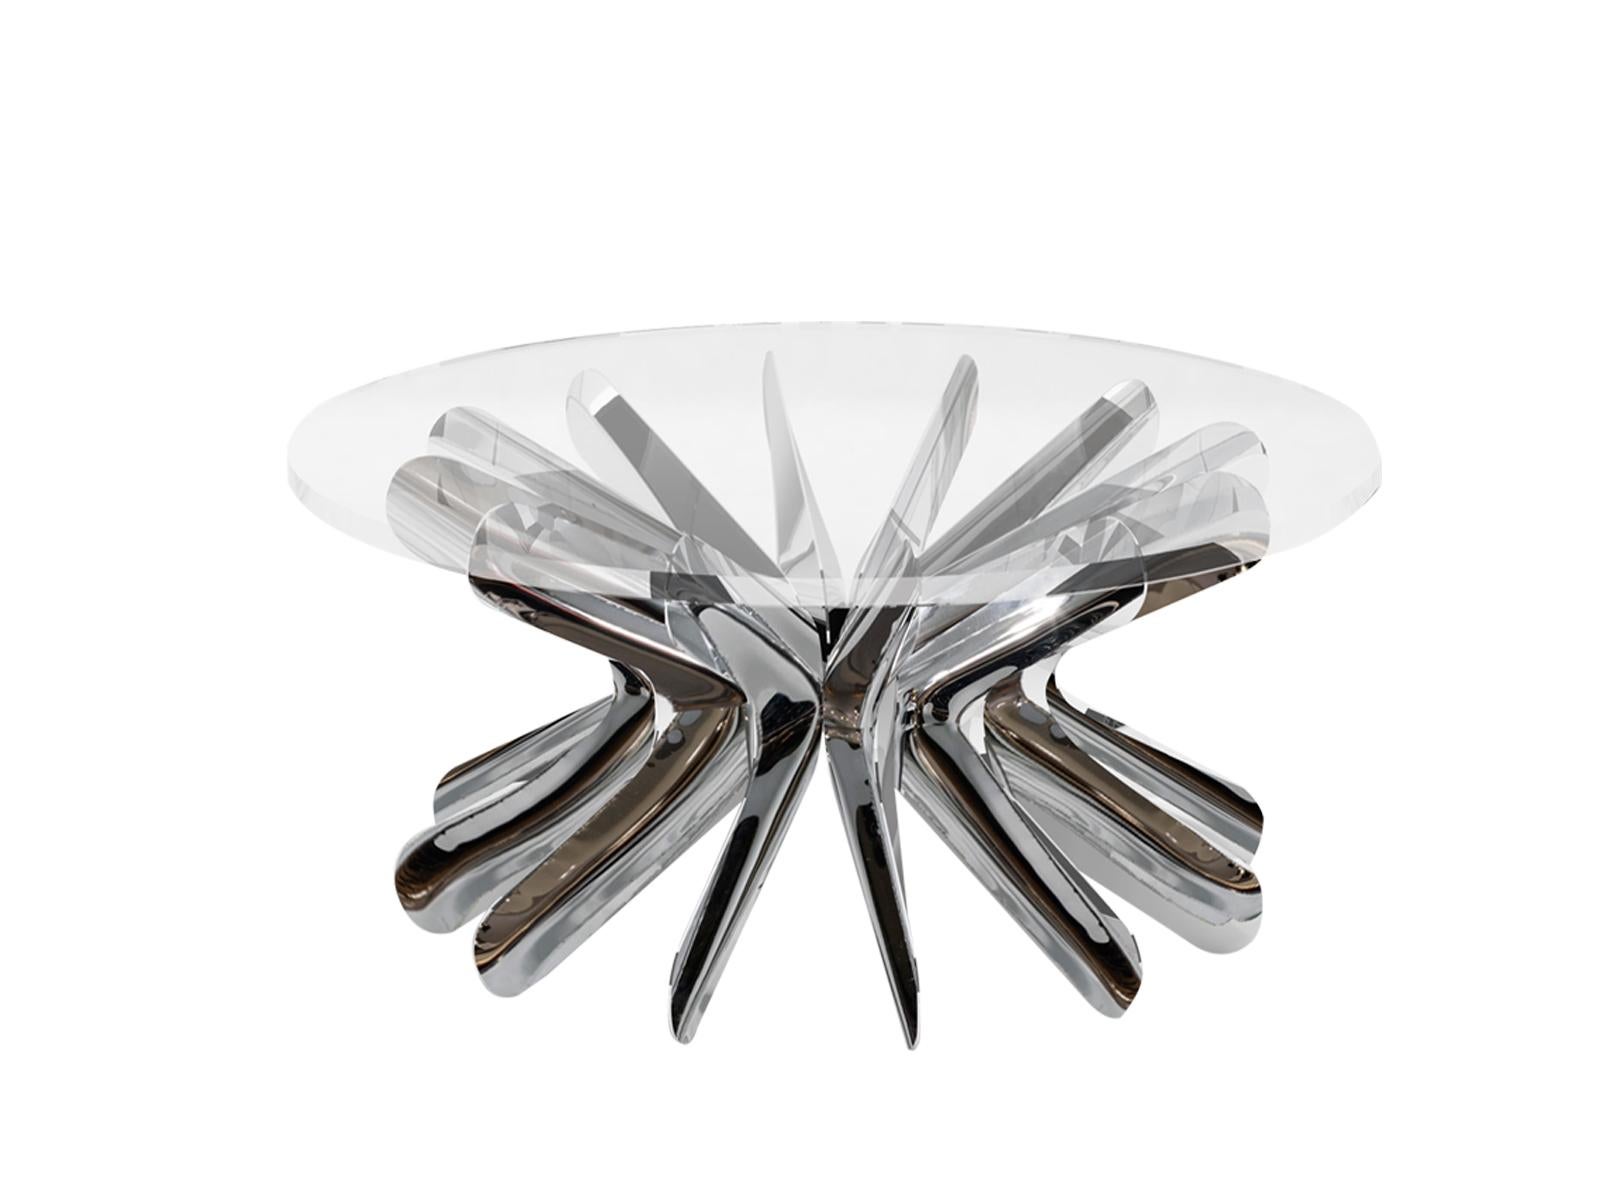 Polish Contemporary Dining Table 'Steel in Rotation No. 1' by Zieta, Stainless Steel For Sale